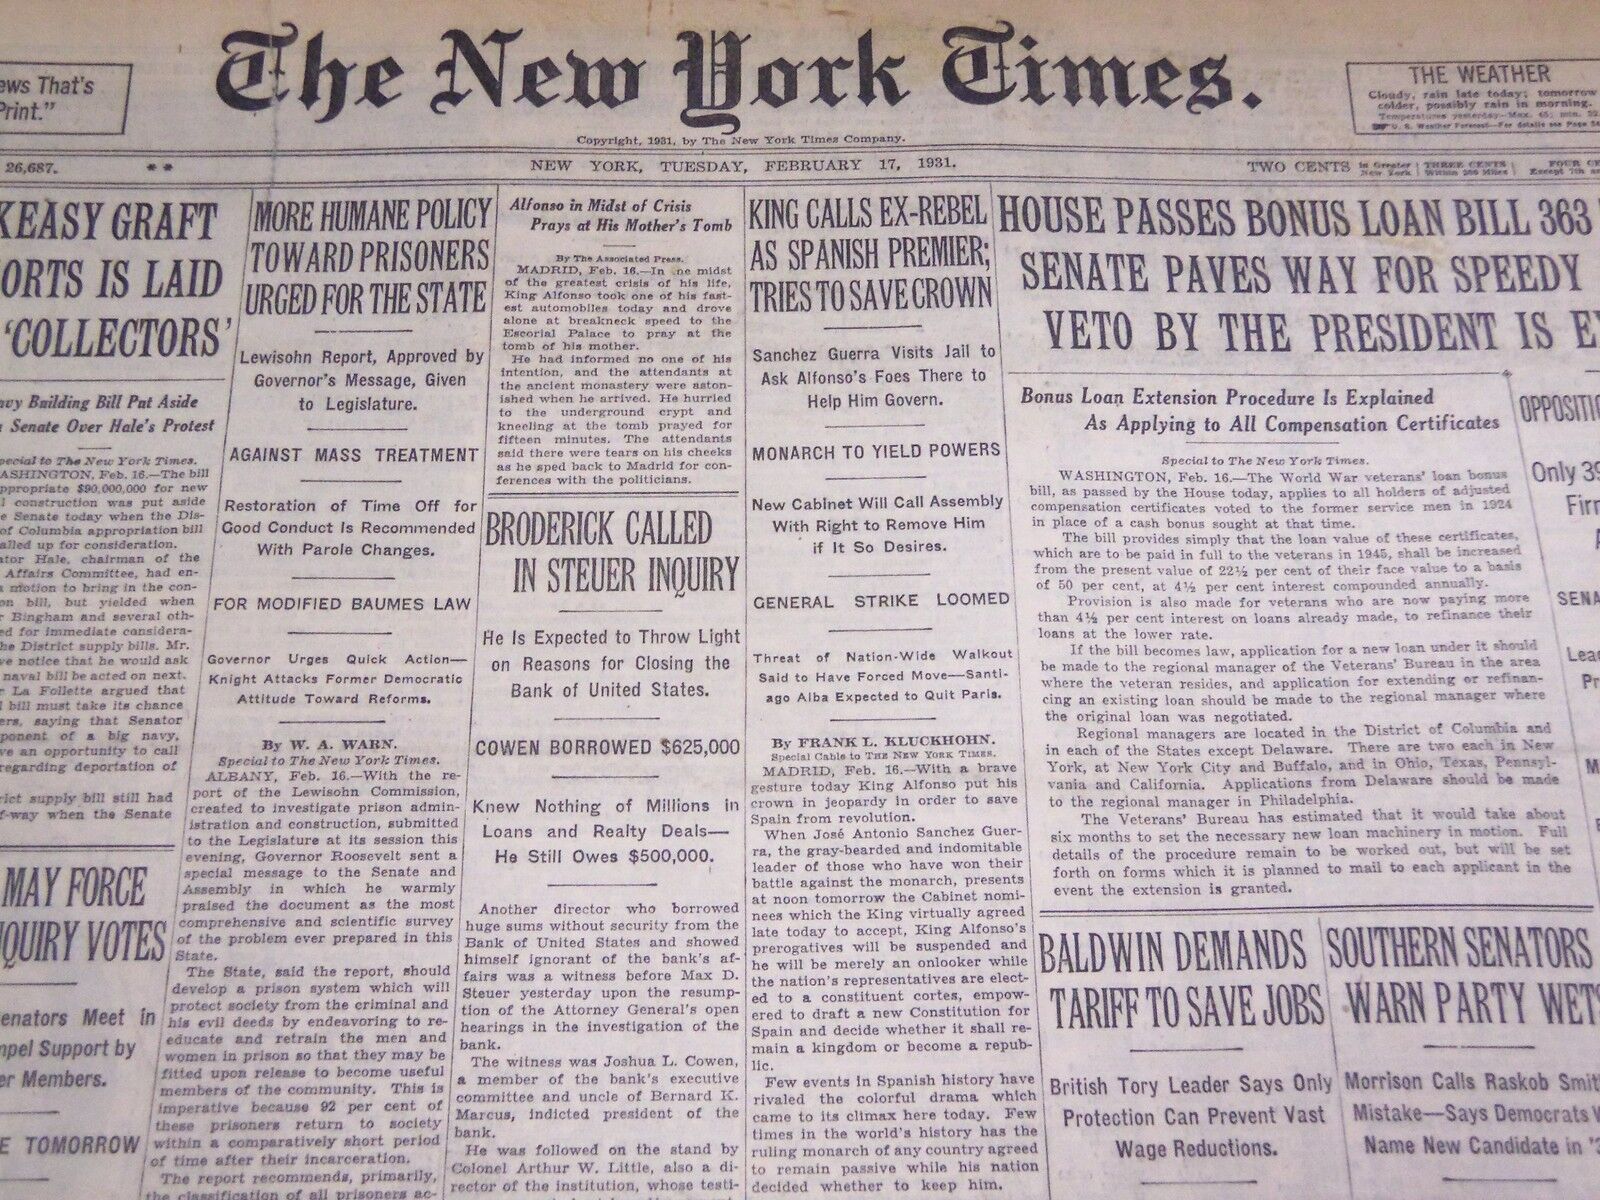 1931 FEBRUARY 17 NEW YORK TIMES - ALFONSO TRIES TO SAVE CROWN - NT 3941